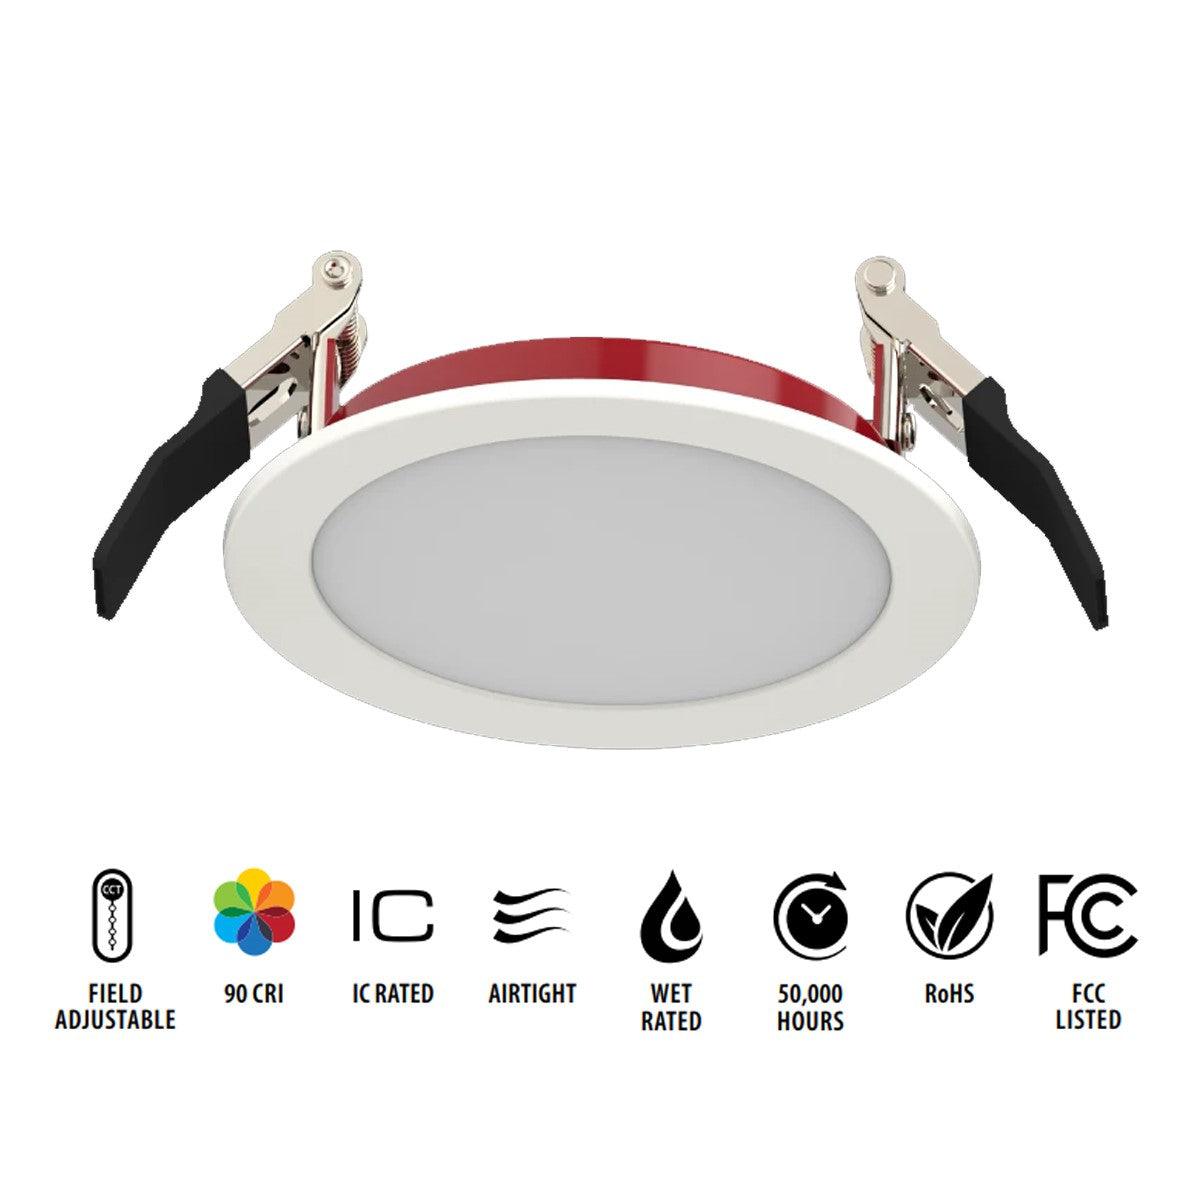 4 In. Fire Rated Wafer Smooth Canless LED Downlight, 11 Watt, 1000 Lumens, Selectable CCT, 2700K to 5000K